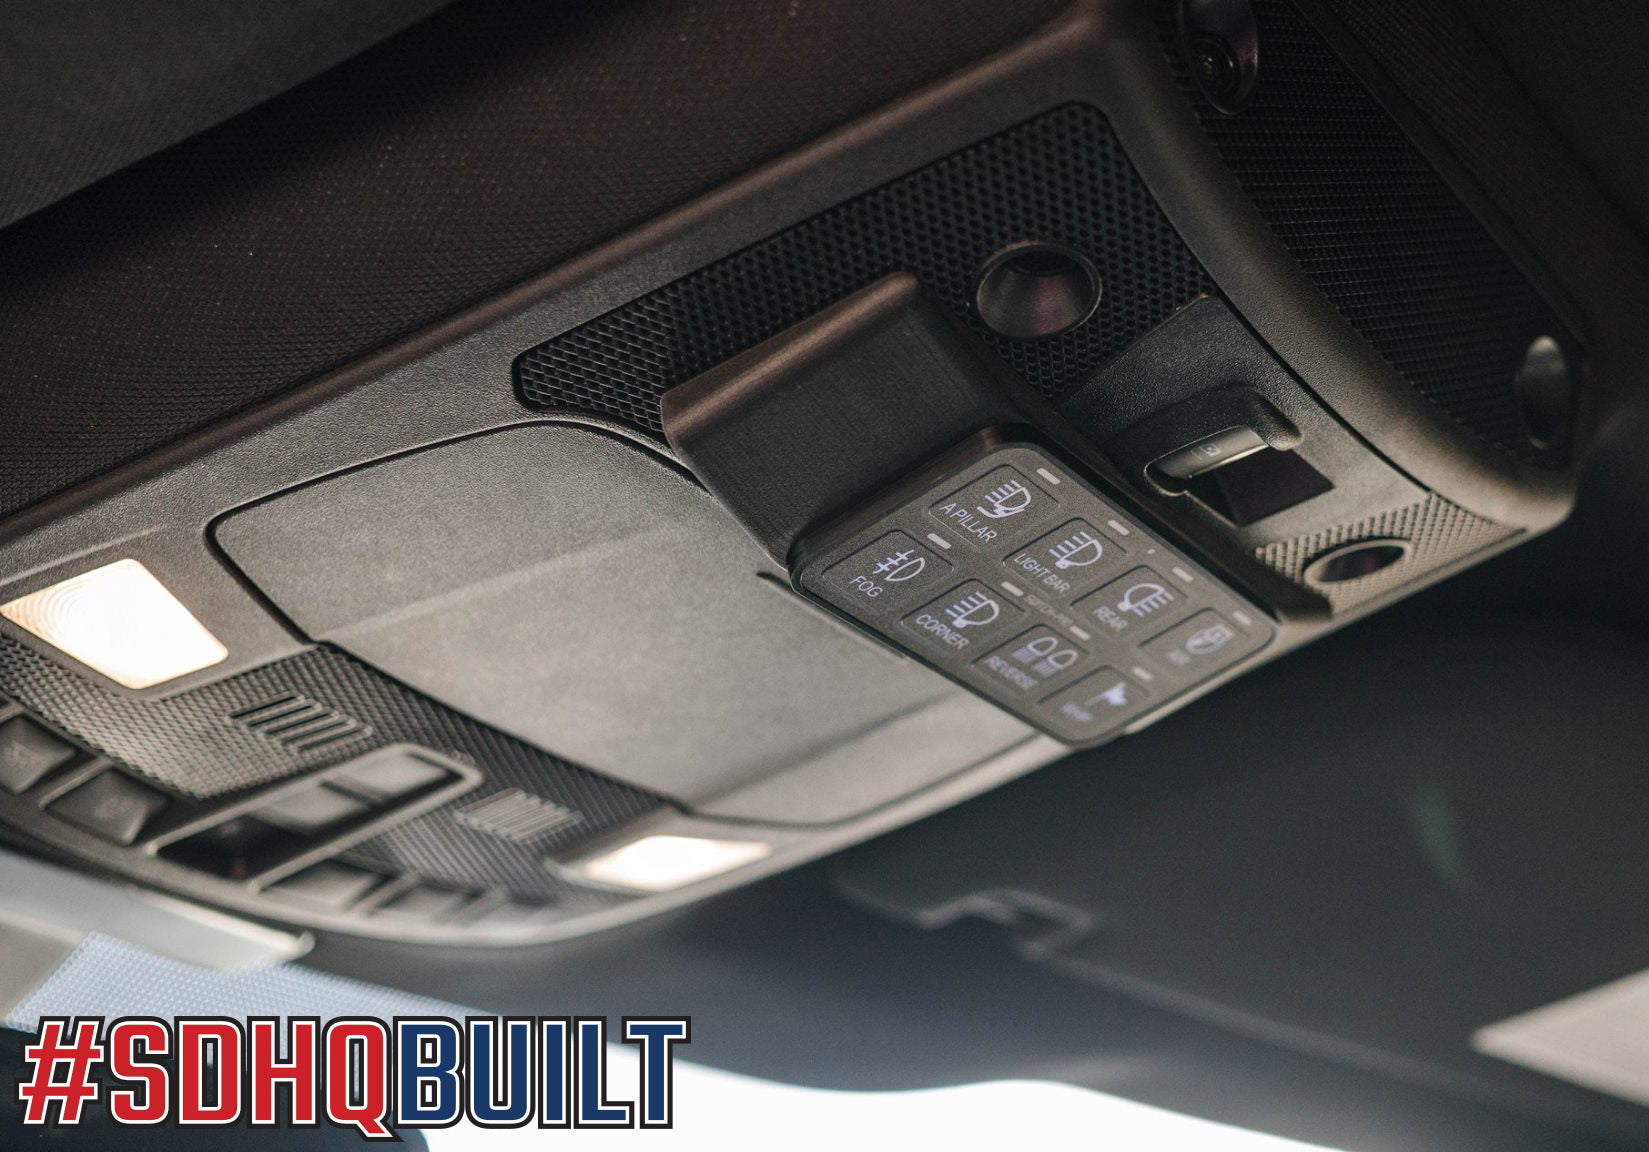 '17-20 Ford Raptor SDHQ Built Complete Switch Pros Mounting Kit